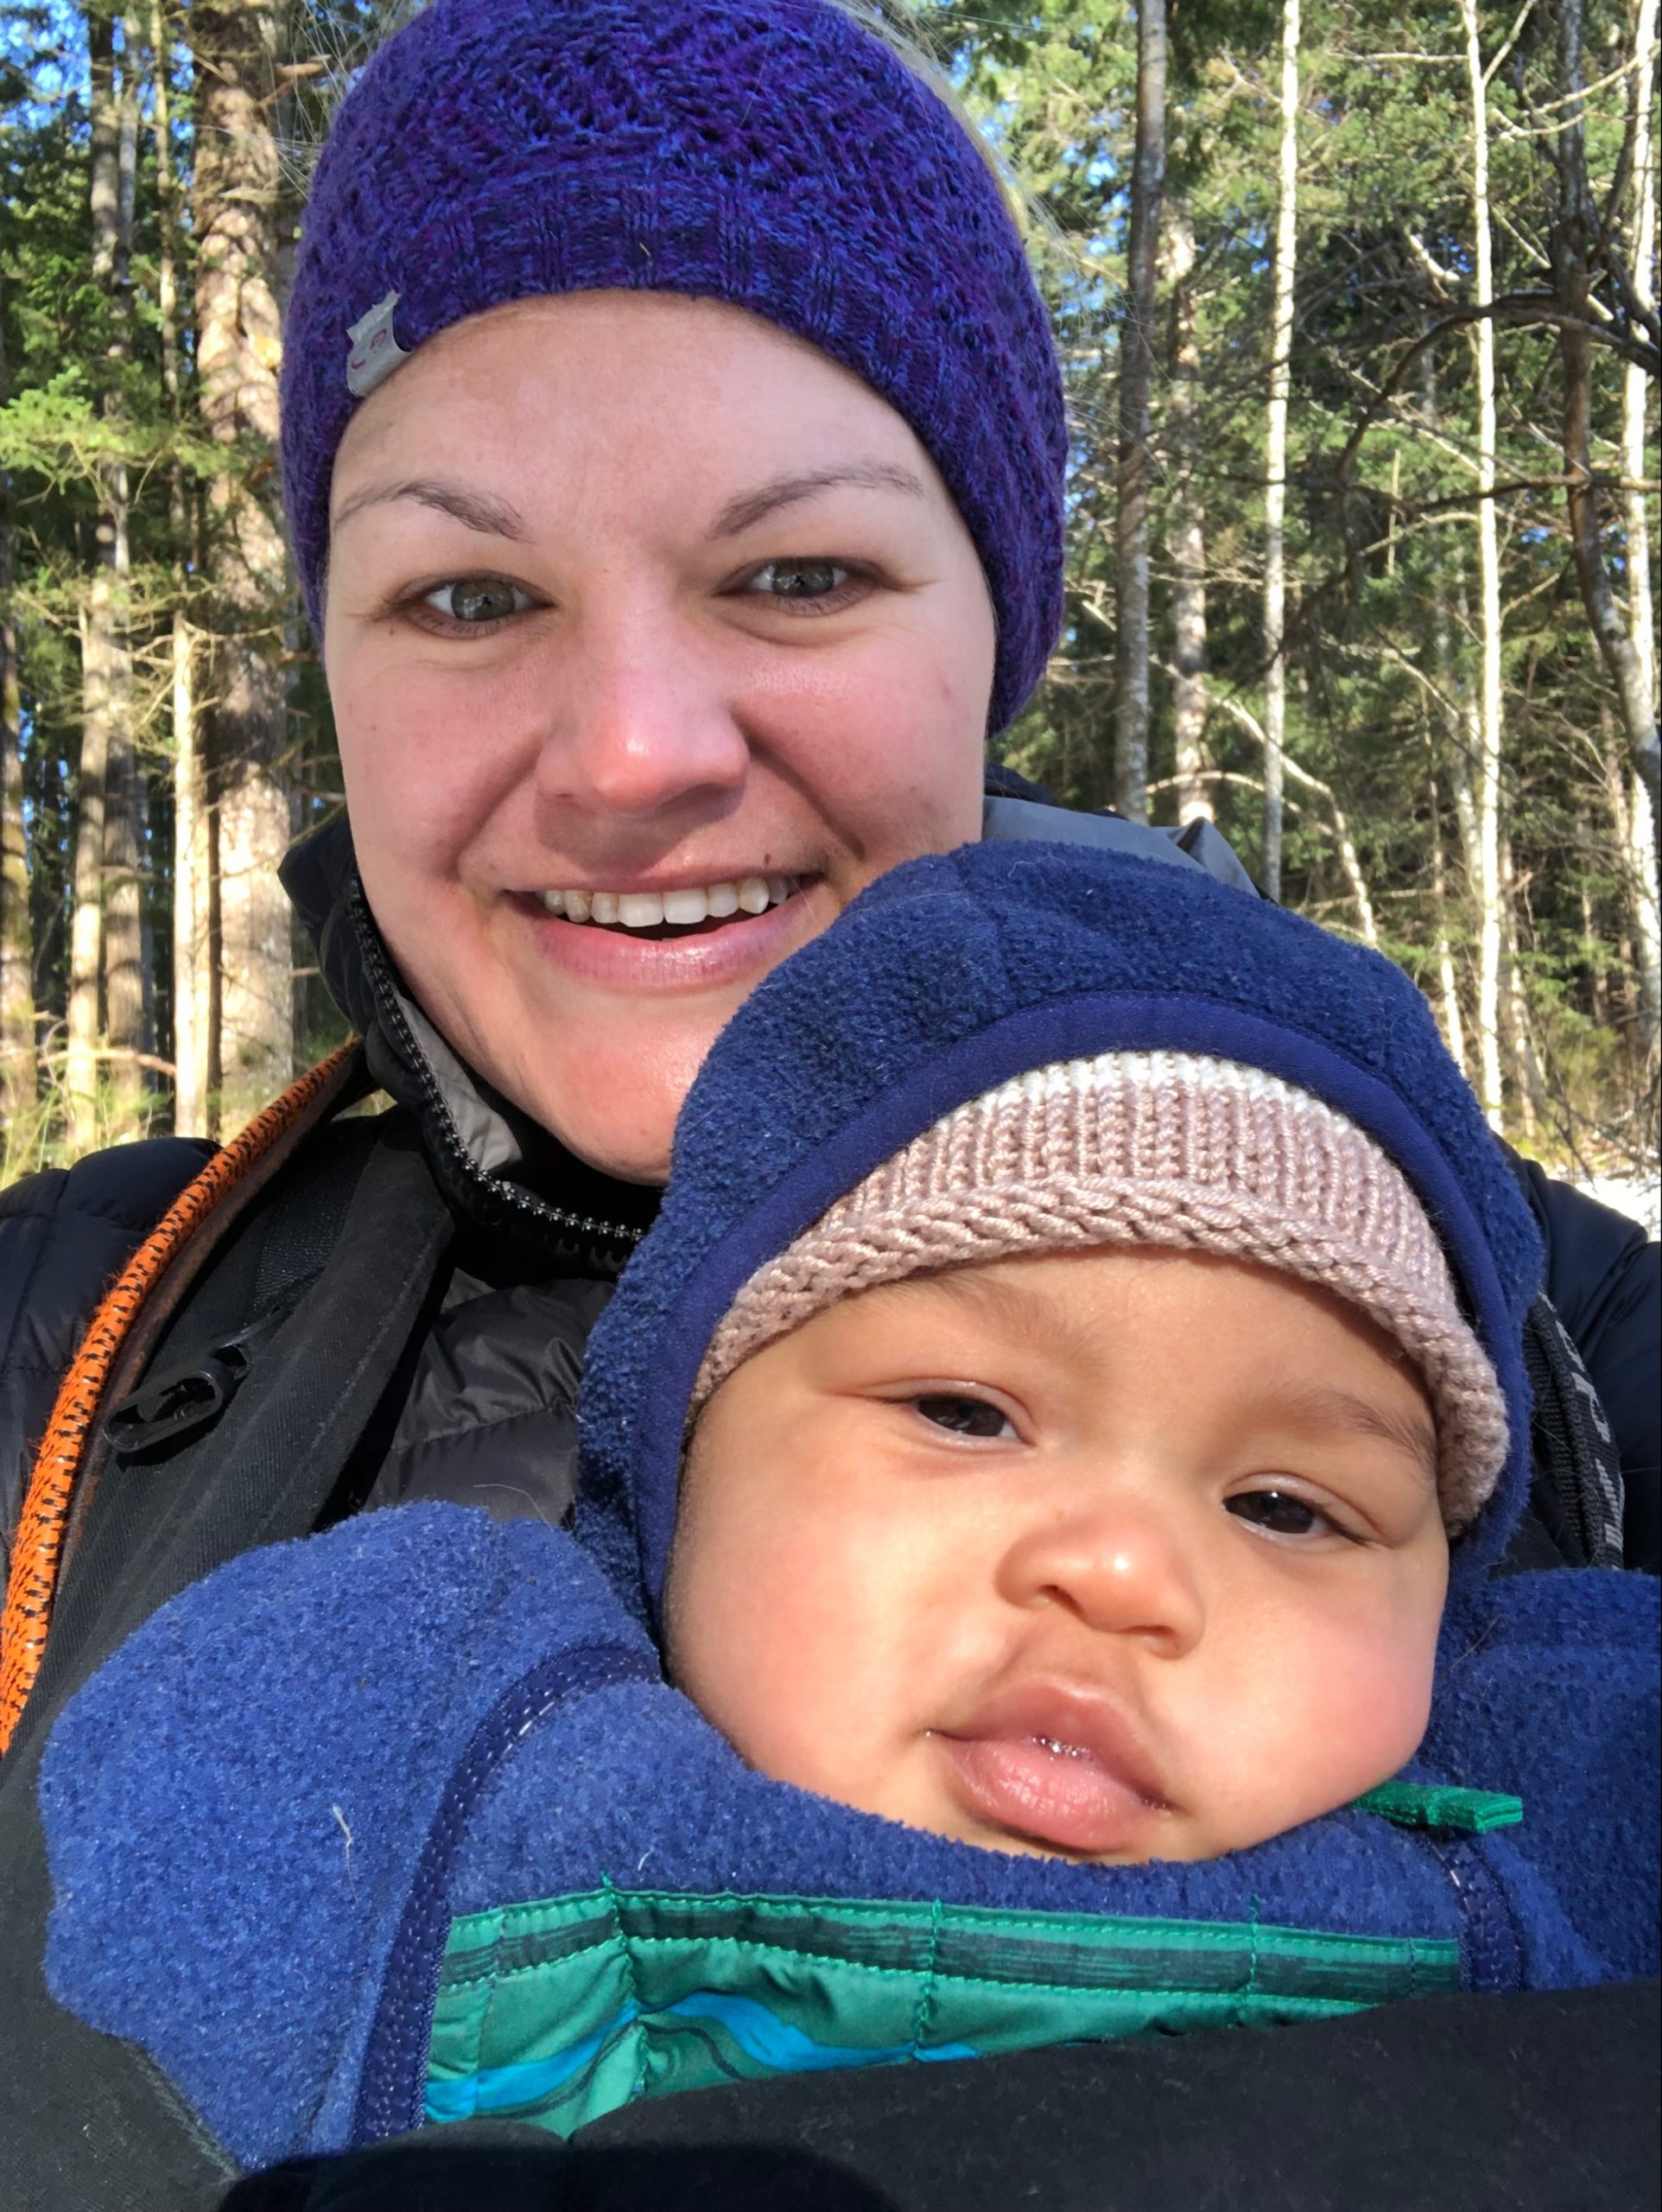 New B.C. mom Holly Noot and her baby pictured outside wearing toques and winter coats